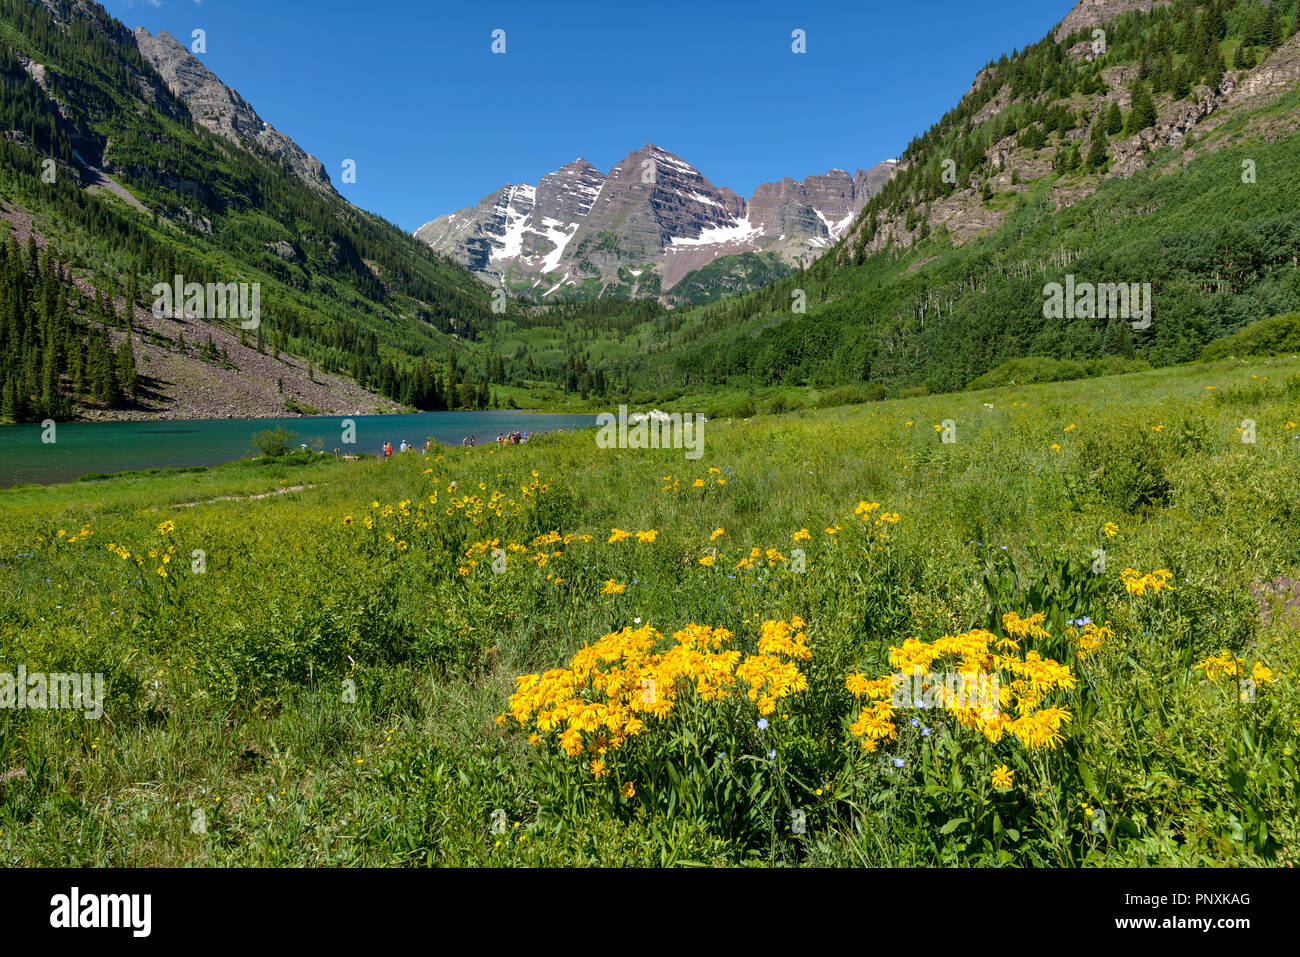 Maroon Creek Valley - A sunny spring view of Maroon Creek Valley, with Maroon Bells and Maroon Lake in the background, Aspen, Colorado, USA. Stock Photo